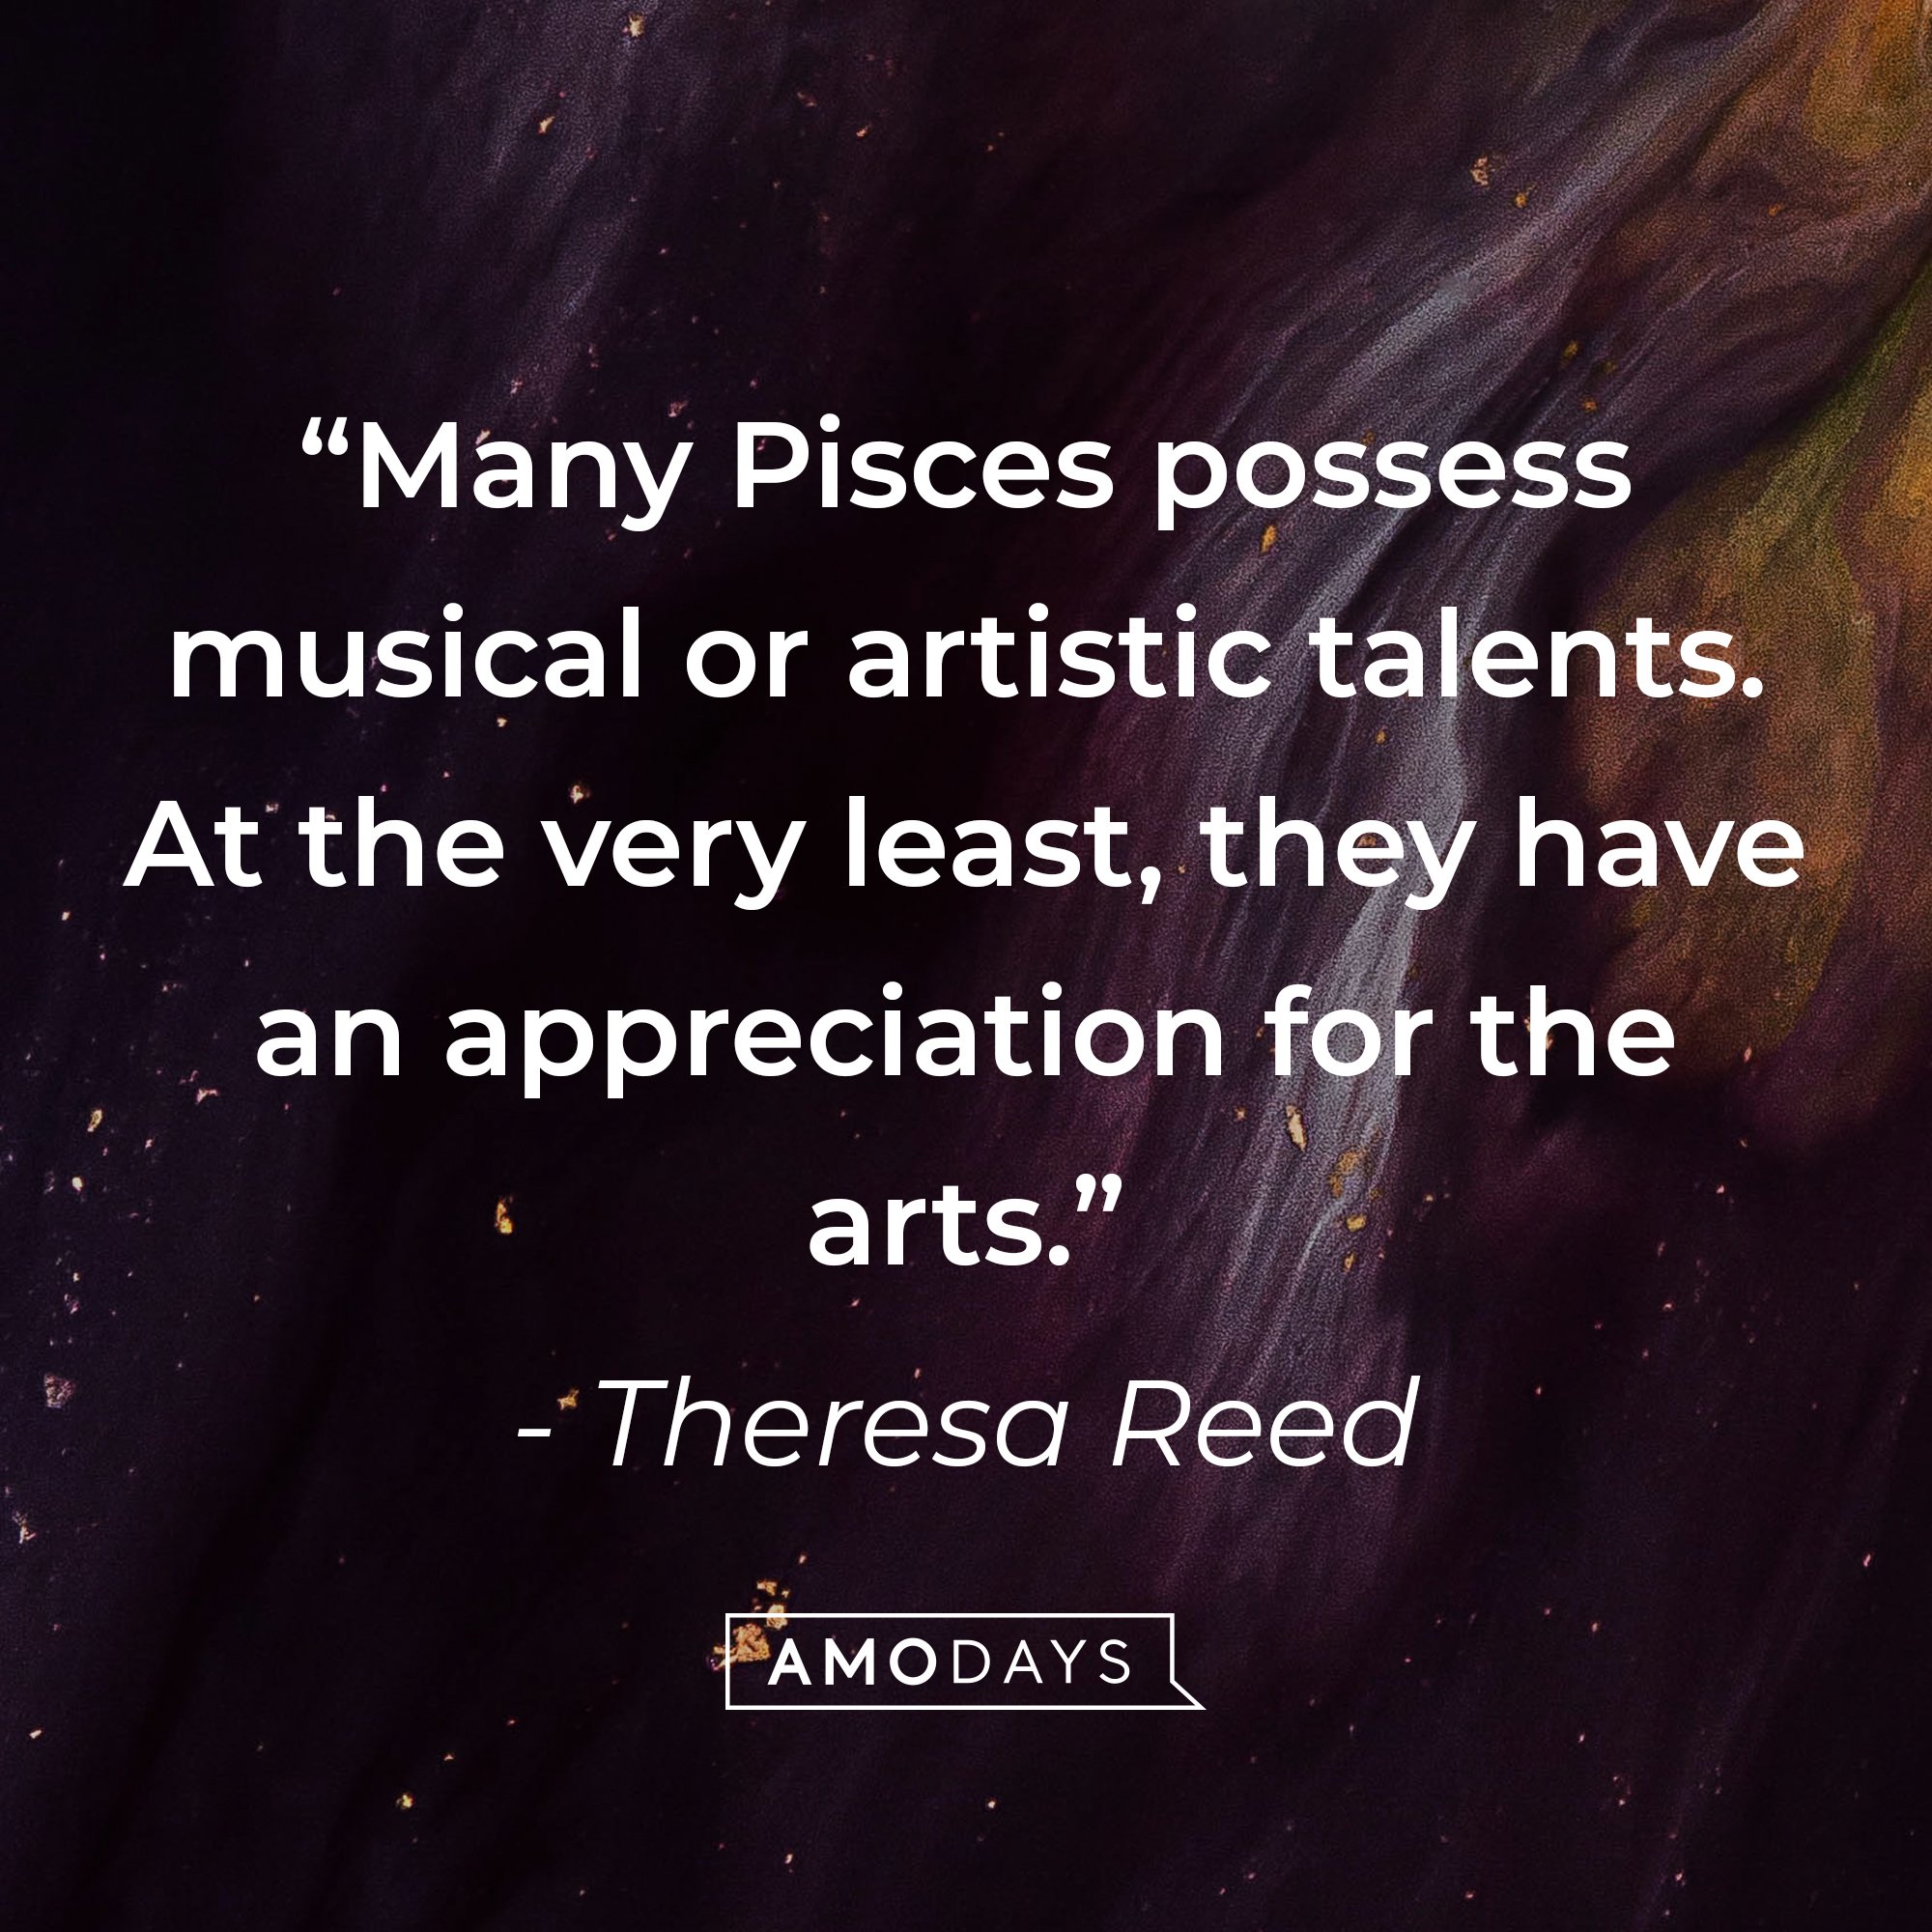 Theresa Reed's quote: "Many Pisces possess musical or artistic talents. At the very least, they have an appreciation for the arts." | Image: AmoDays